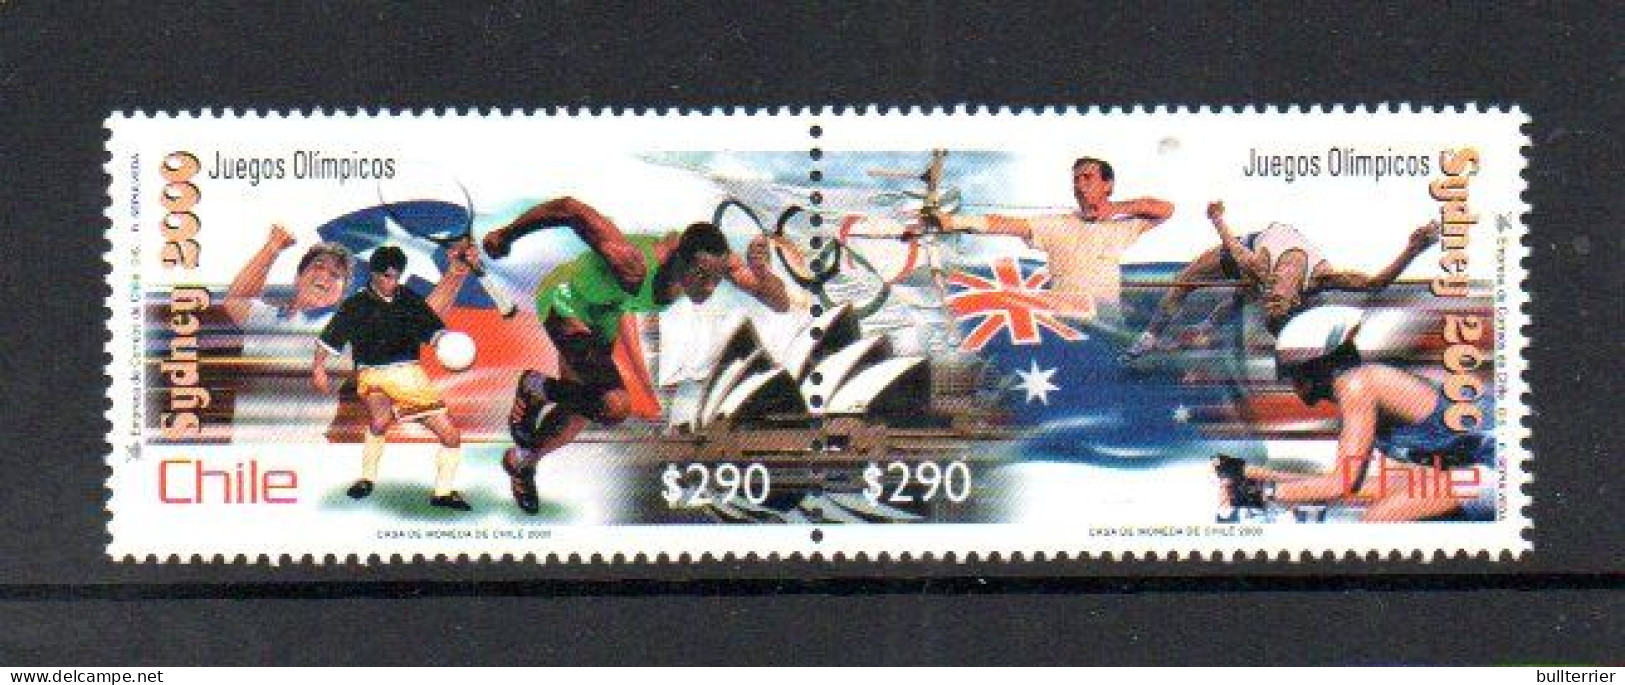 OLYMPICS - CHILE   -  2000 SYDNEY OLYMPICS SET OF 2 IN PAIR   MINT NEVER HINGED - Sommer 2000: Sydney